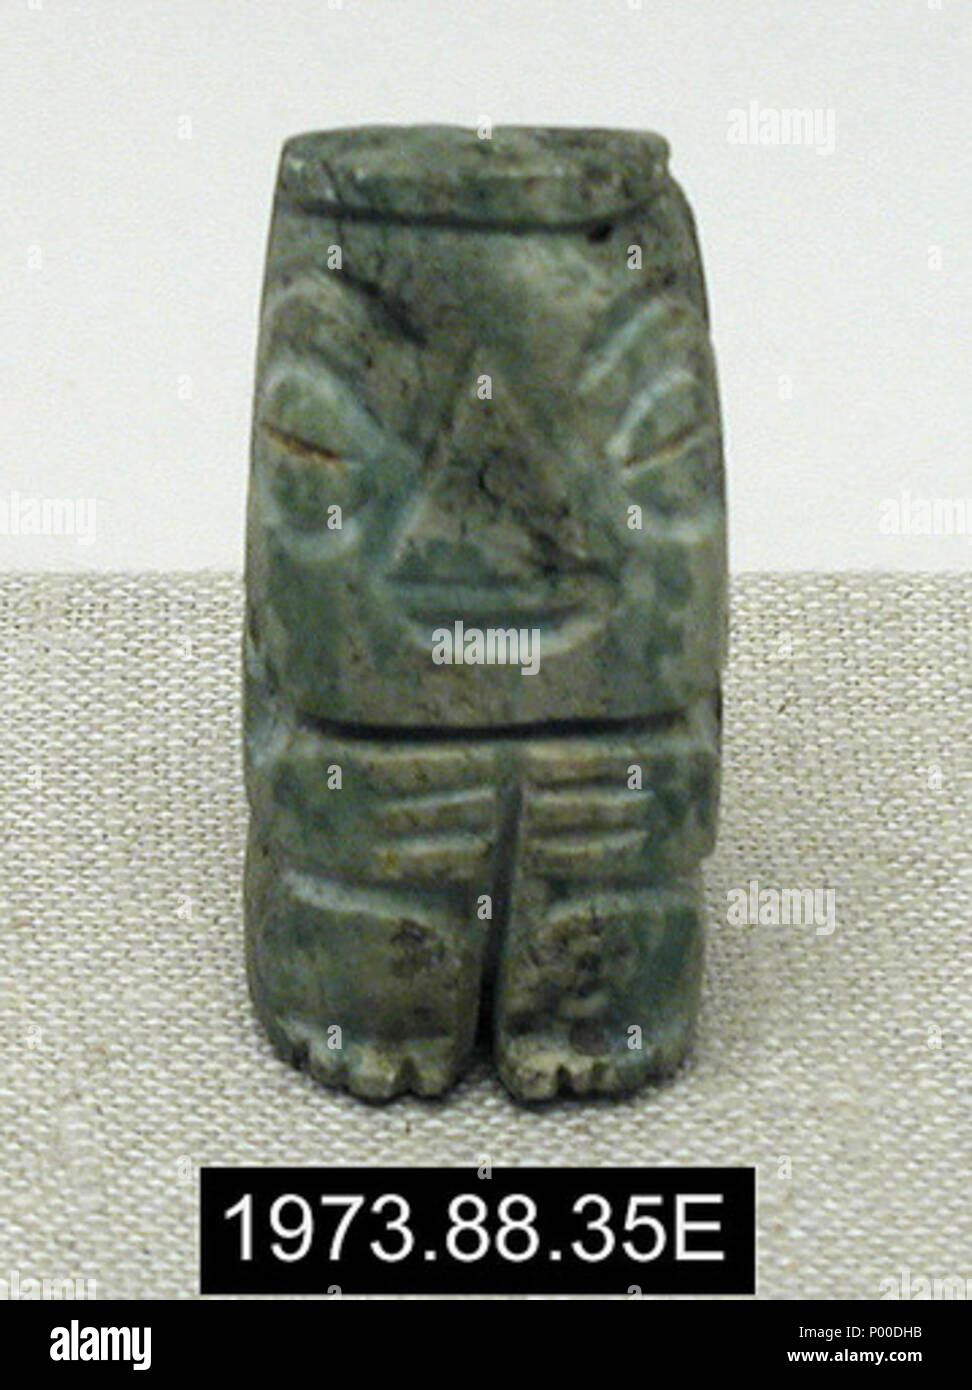 . English: A jade figurine (ca. 1200-1521) from the Late Postclassic Period in Mesoamerica. Measures 5.7 x 2.9 x 2.1 cm. From the collection of the Yale University Art Gallery.  . 5 December 1200. 'Acquisitions, 1973,” Yale University Art Gallery Bulletin 35, no. 1 (Summer 1974): 78. 53 Jade Figurine Stock Photo